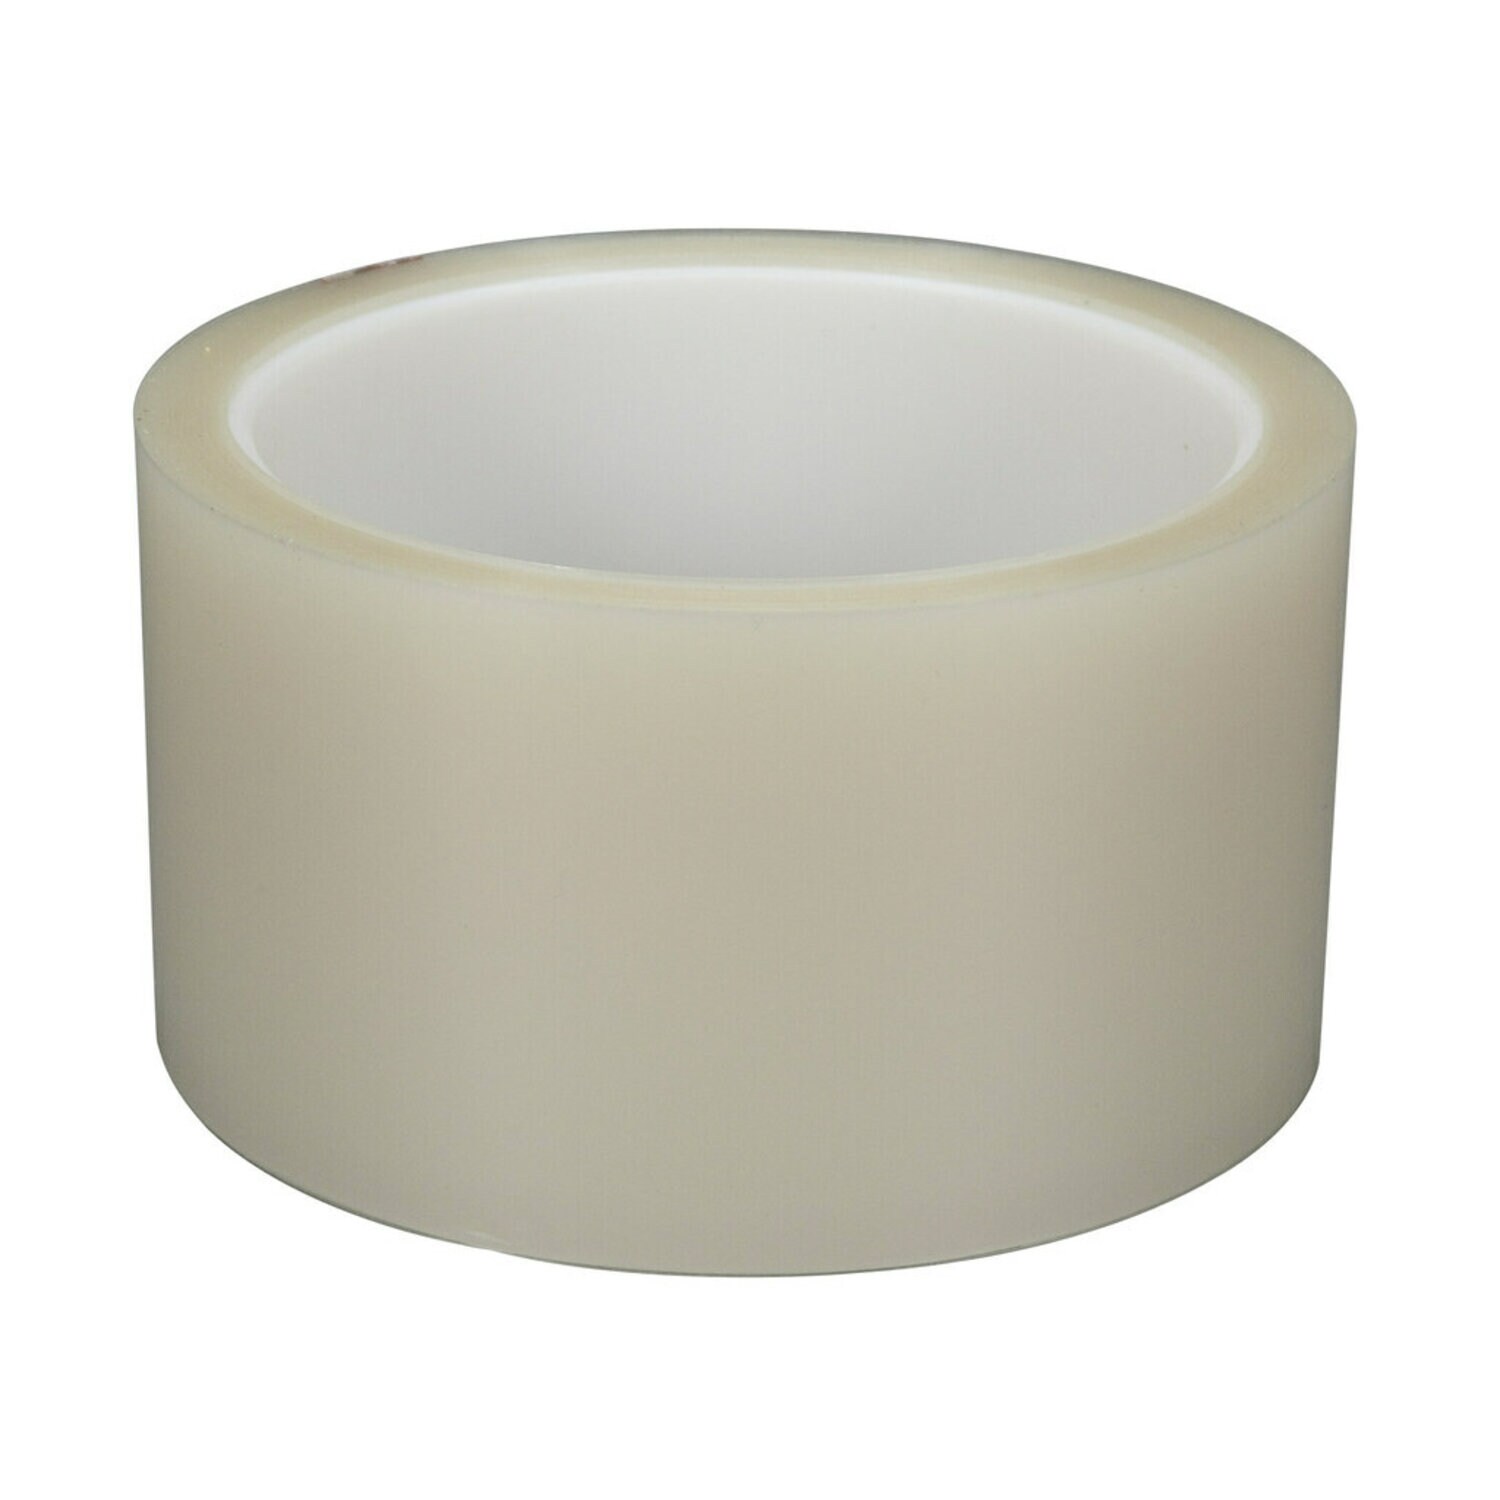 7010048691 - 3M Polyester Film Tape 853, Transparent, 6 in x 72 yd, 2.2 mil, 8
Rolls/Case